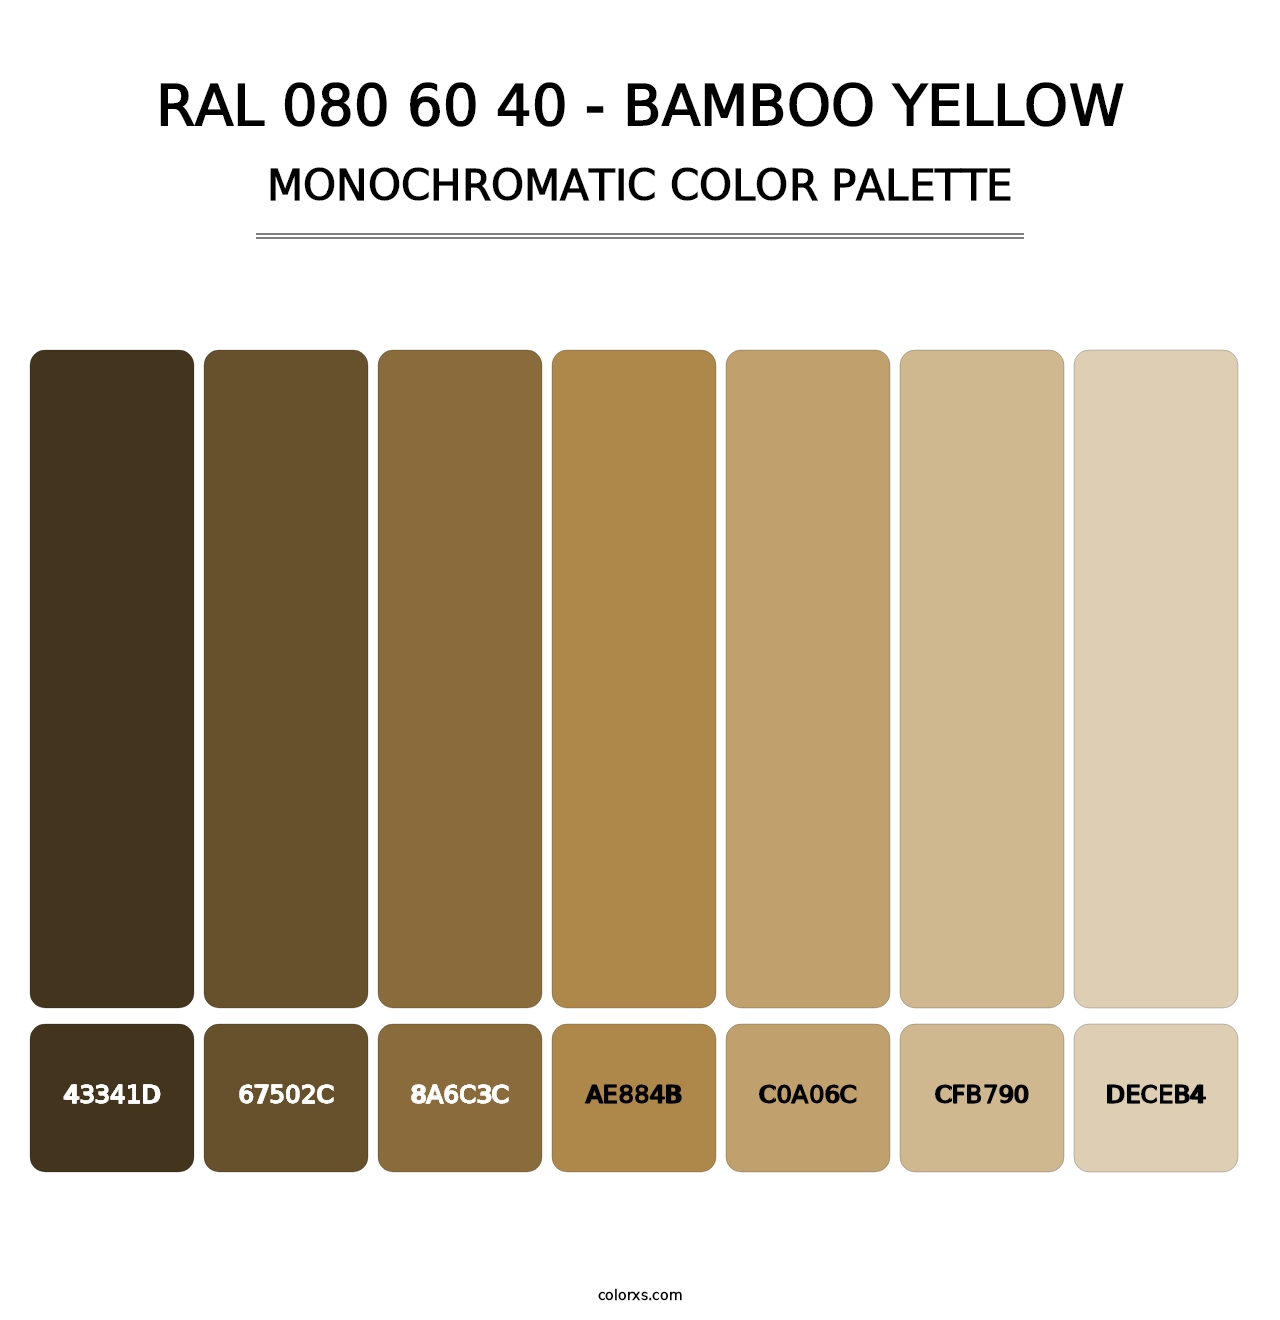 RAL 080 60 40 - Bamboo Yellow - Monochromatic Color Palette